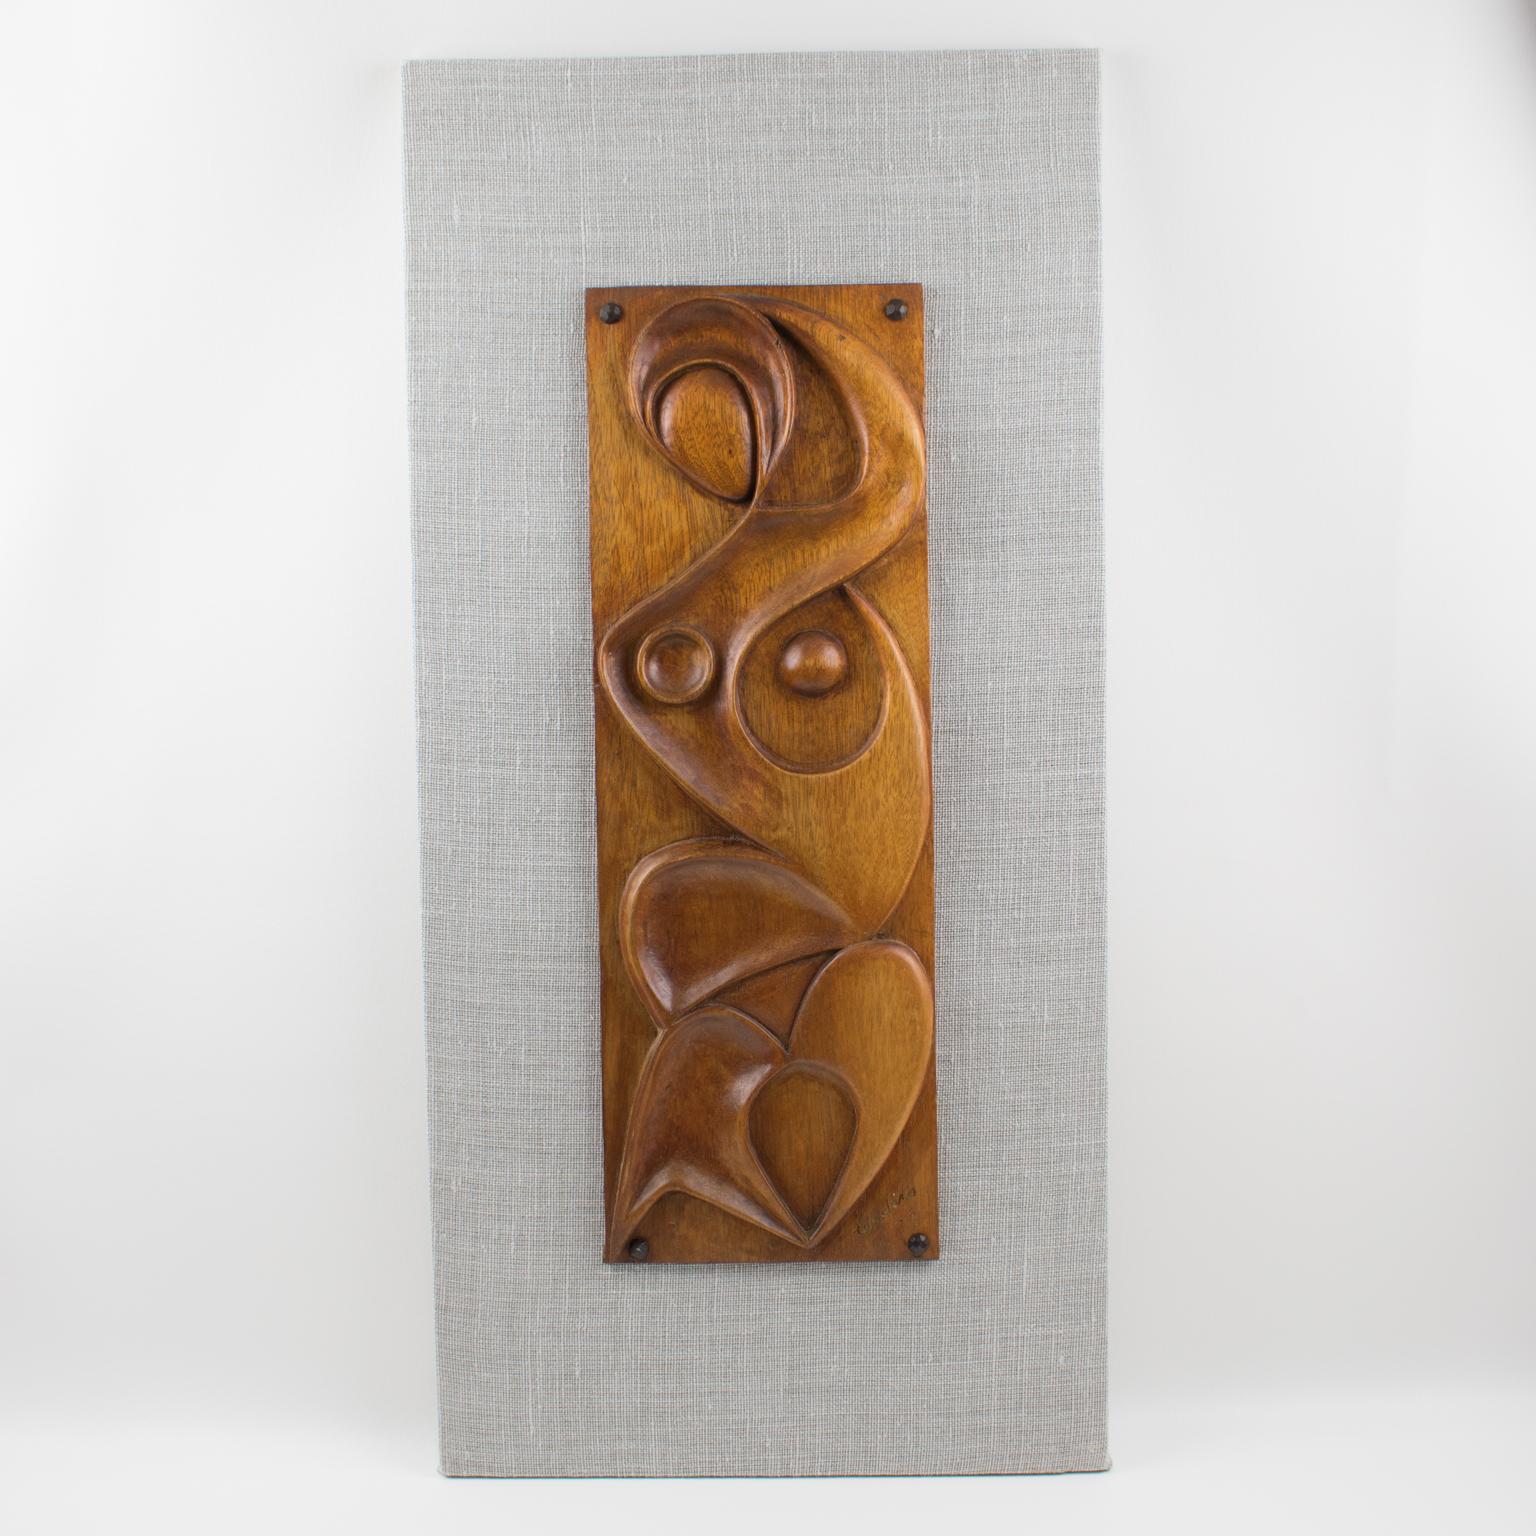 Abstract Wooden Wall-Mounted Art Sculpture Panel by Maxime Tendero For Sale 3